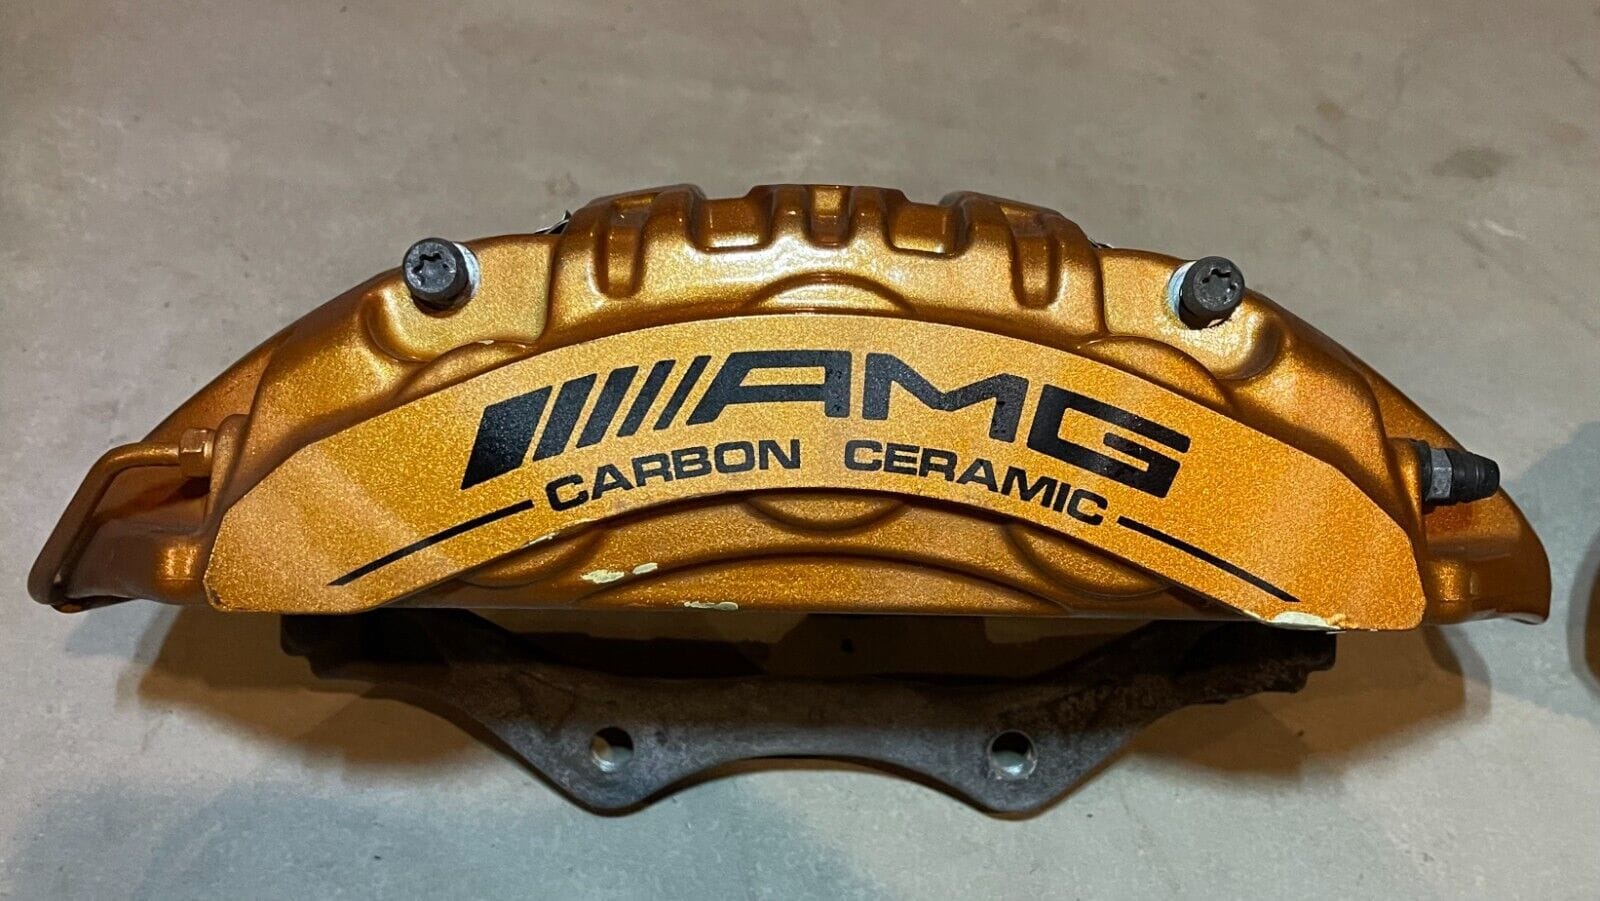 Brakes - E63 AMG W212 Two Front Brake Calipers 2124219798 2124219998 CCB Gold - Used - All Years  All Models - Mississauga, ON L5M1M3, Canada